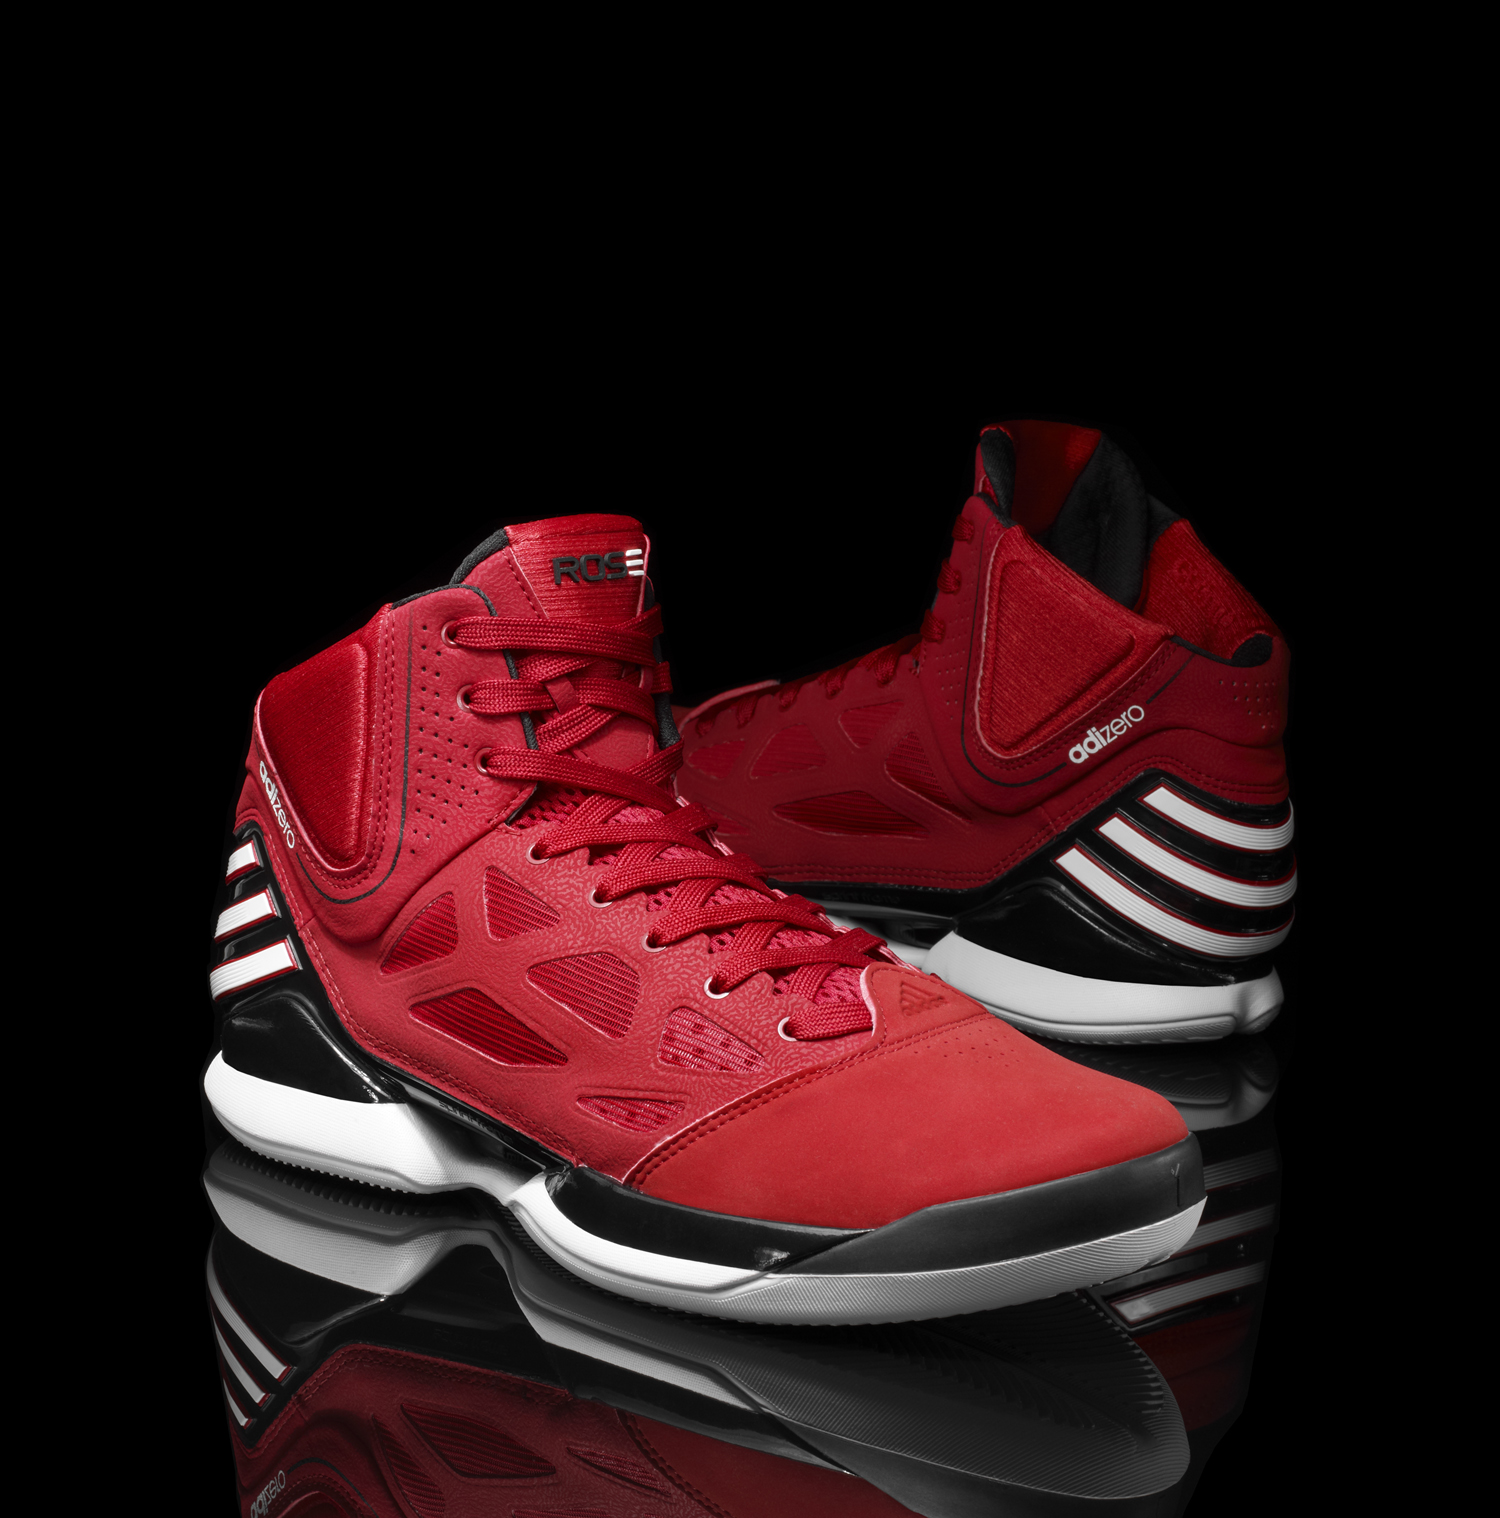 Best Derrick Rose Basketball Shoes - 5 Shoes starting from $99.99